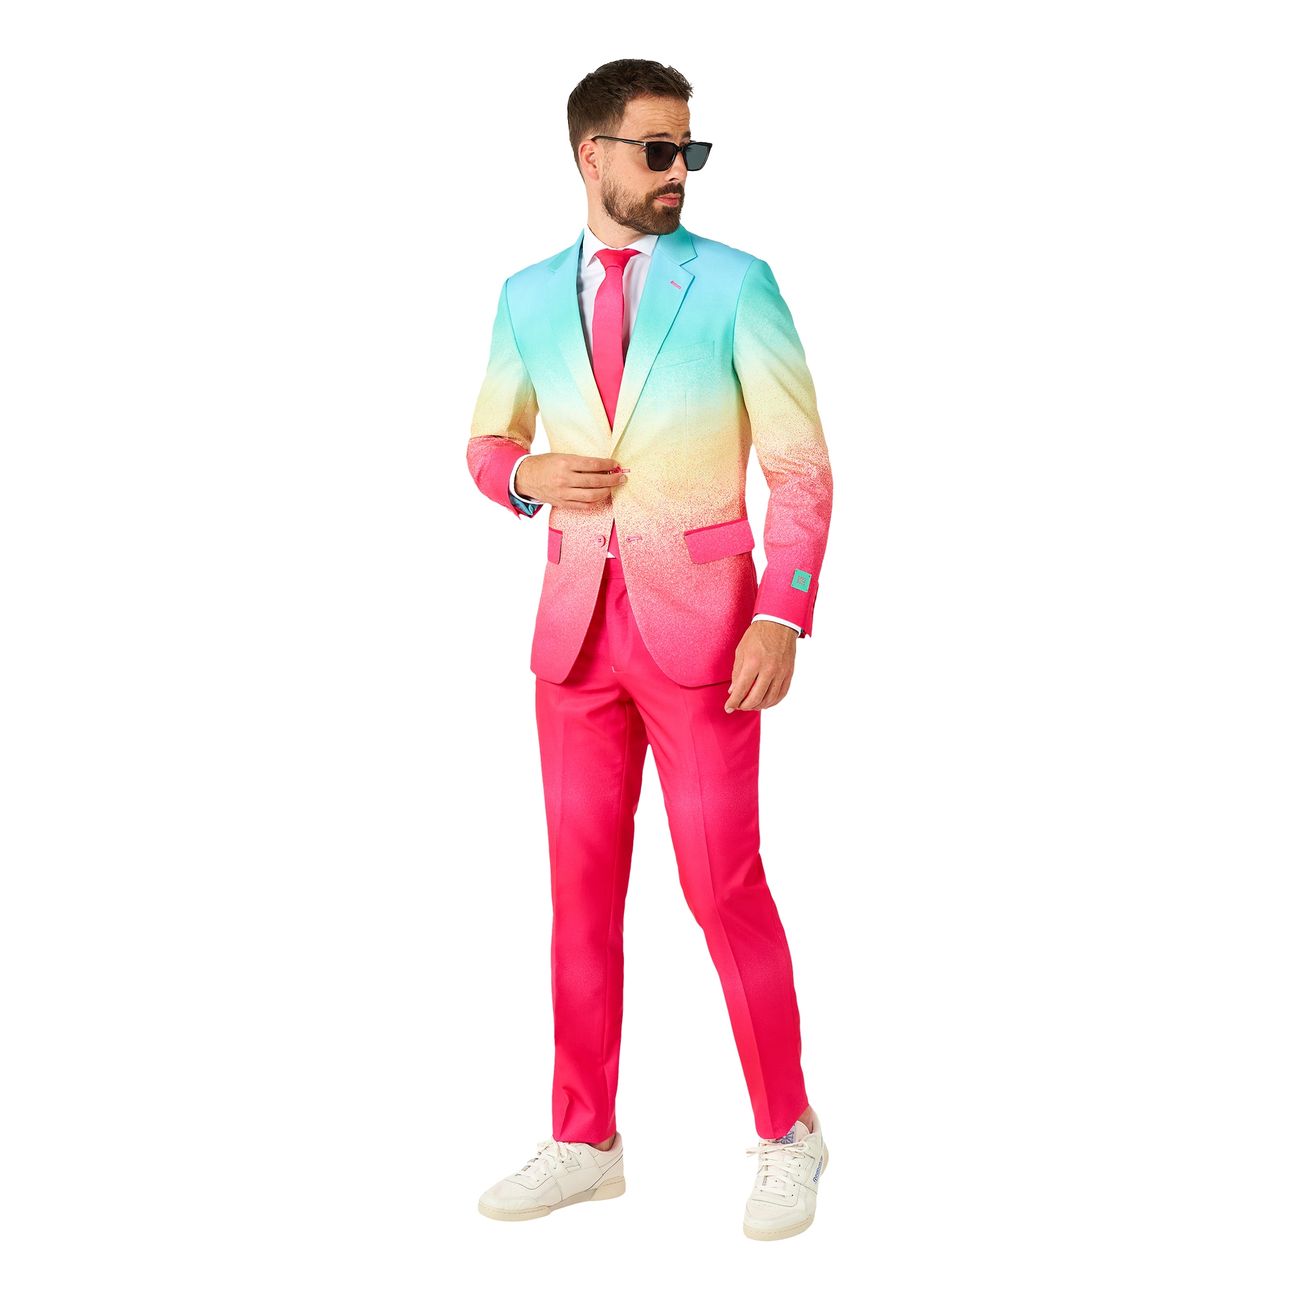 opposuits-funky-fade-kostym-100044-1